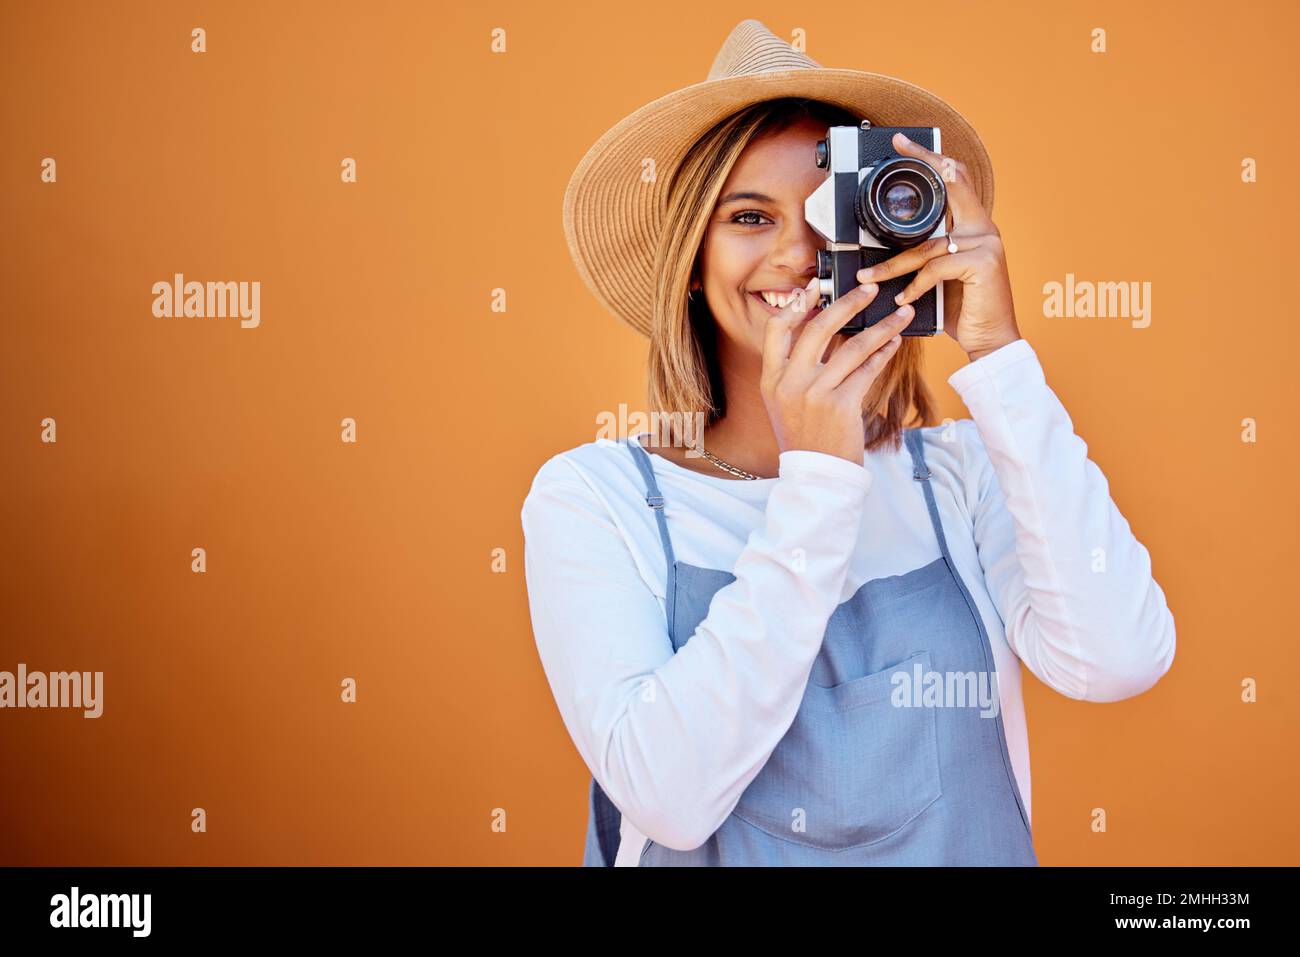 Photographer, portrait and woman shooting a picture or photo with a retro camera isolated in an orange background. Happy, studio and female taking Stock Photo